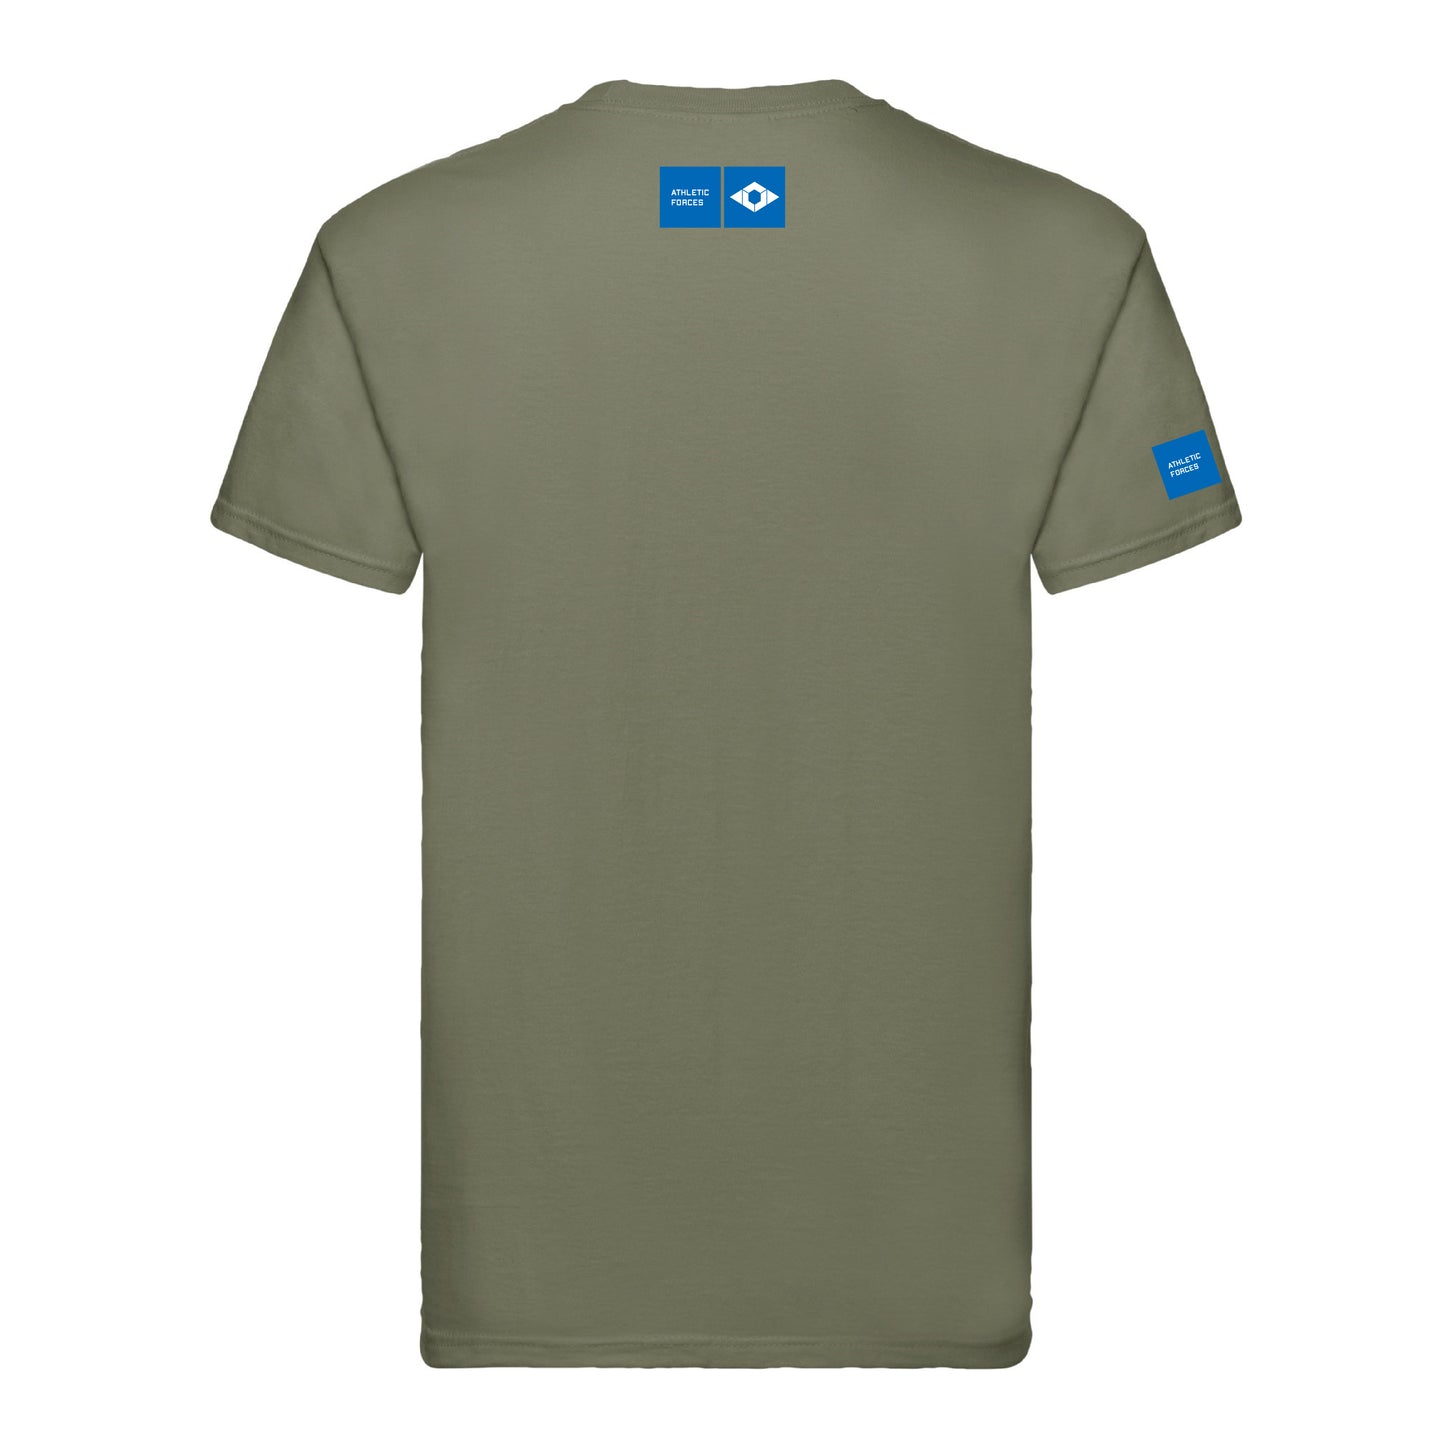 Union of Forces ® T-Shirt